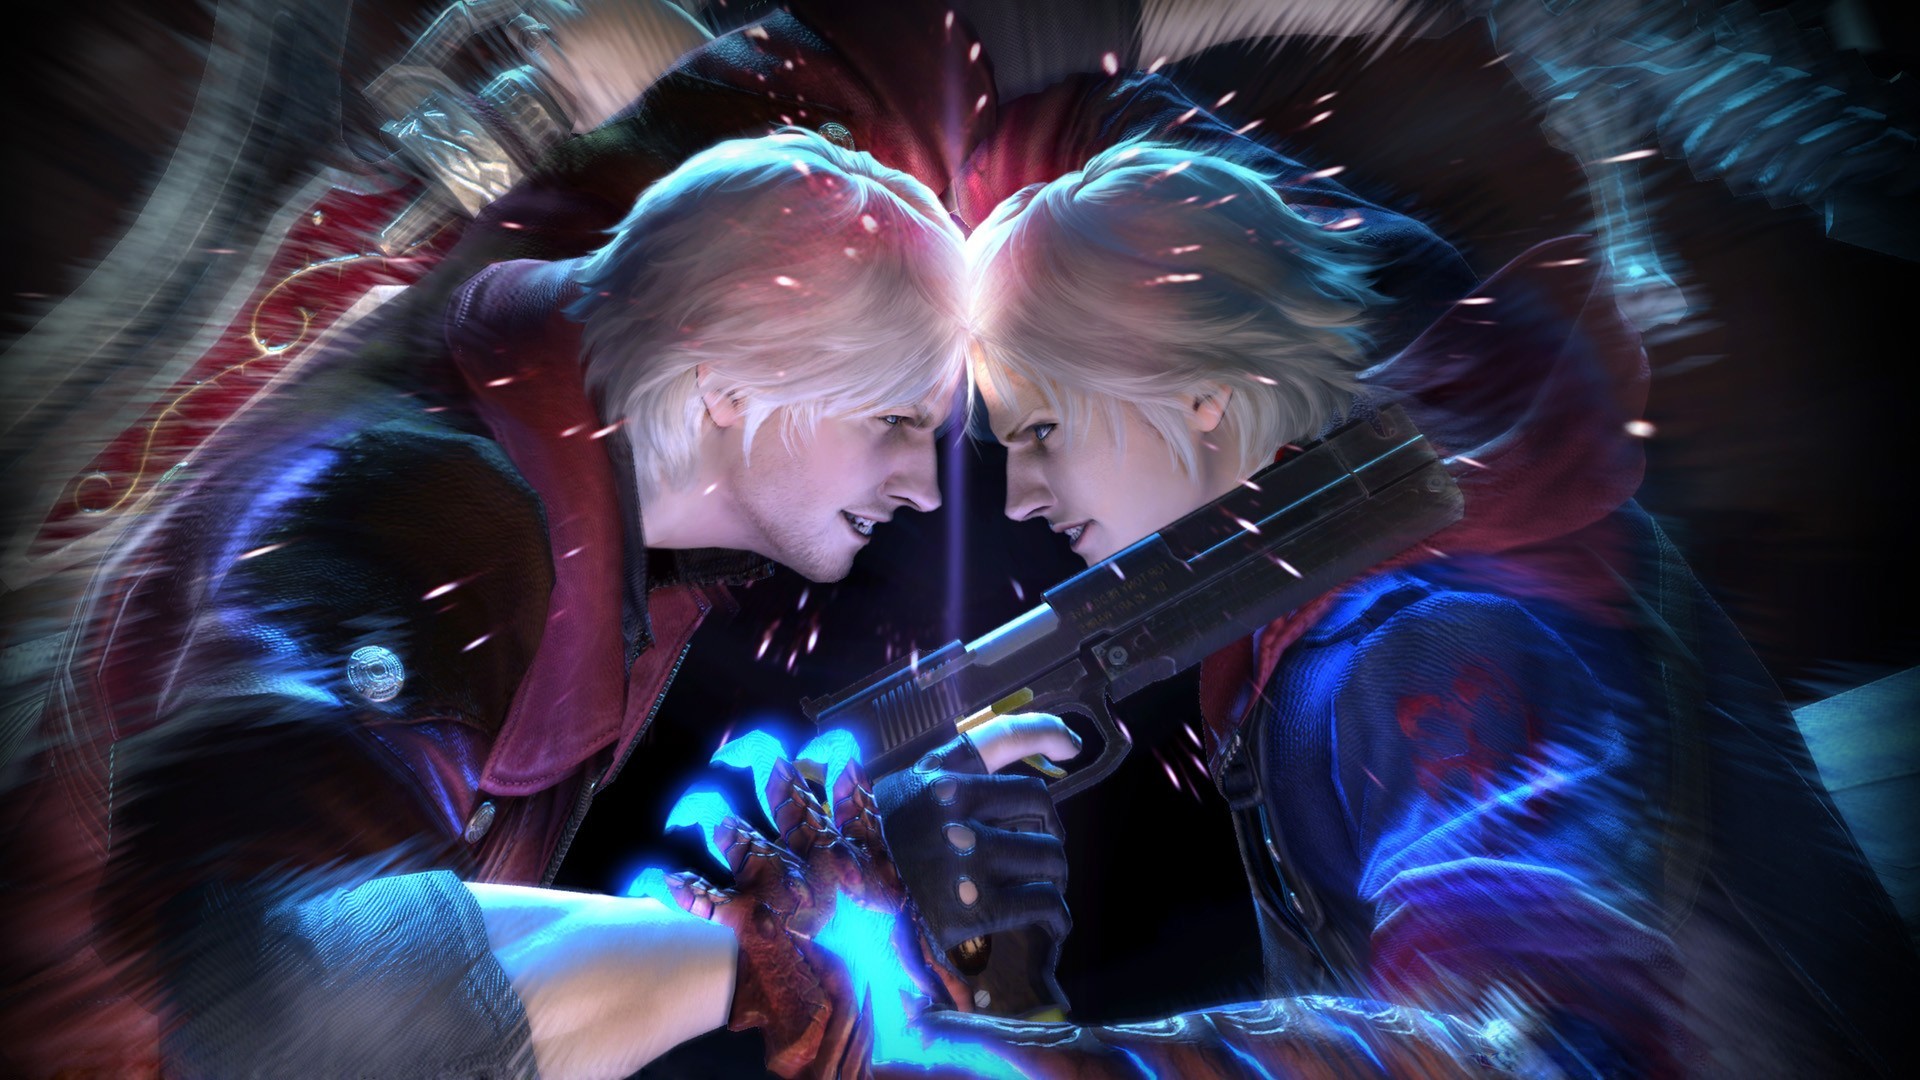 “Devil May Cry 4” & “DmC” Coming to PS4/XBO - Definitive Versions and Vergil Galore